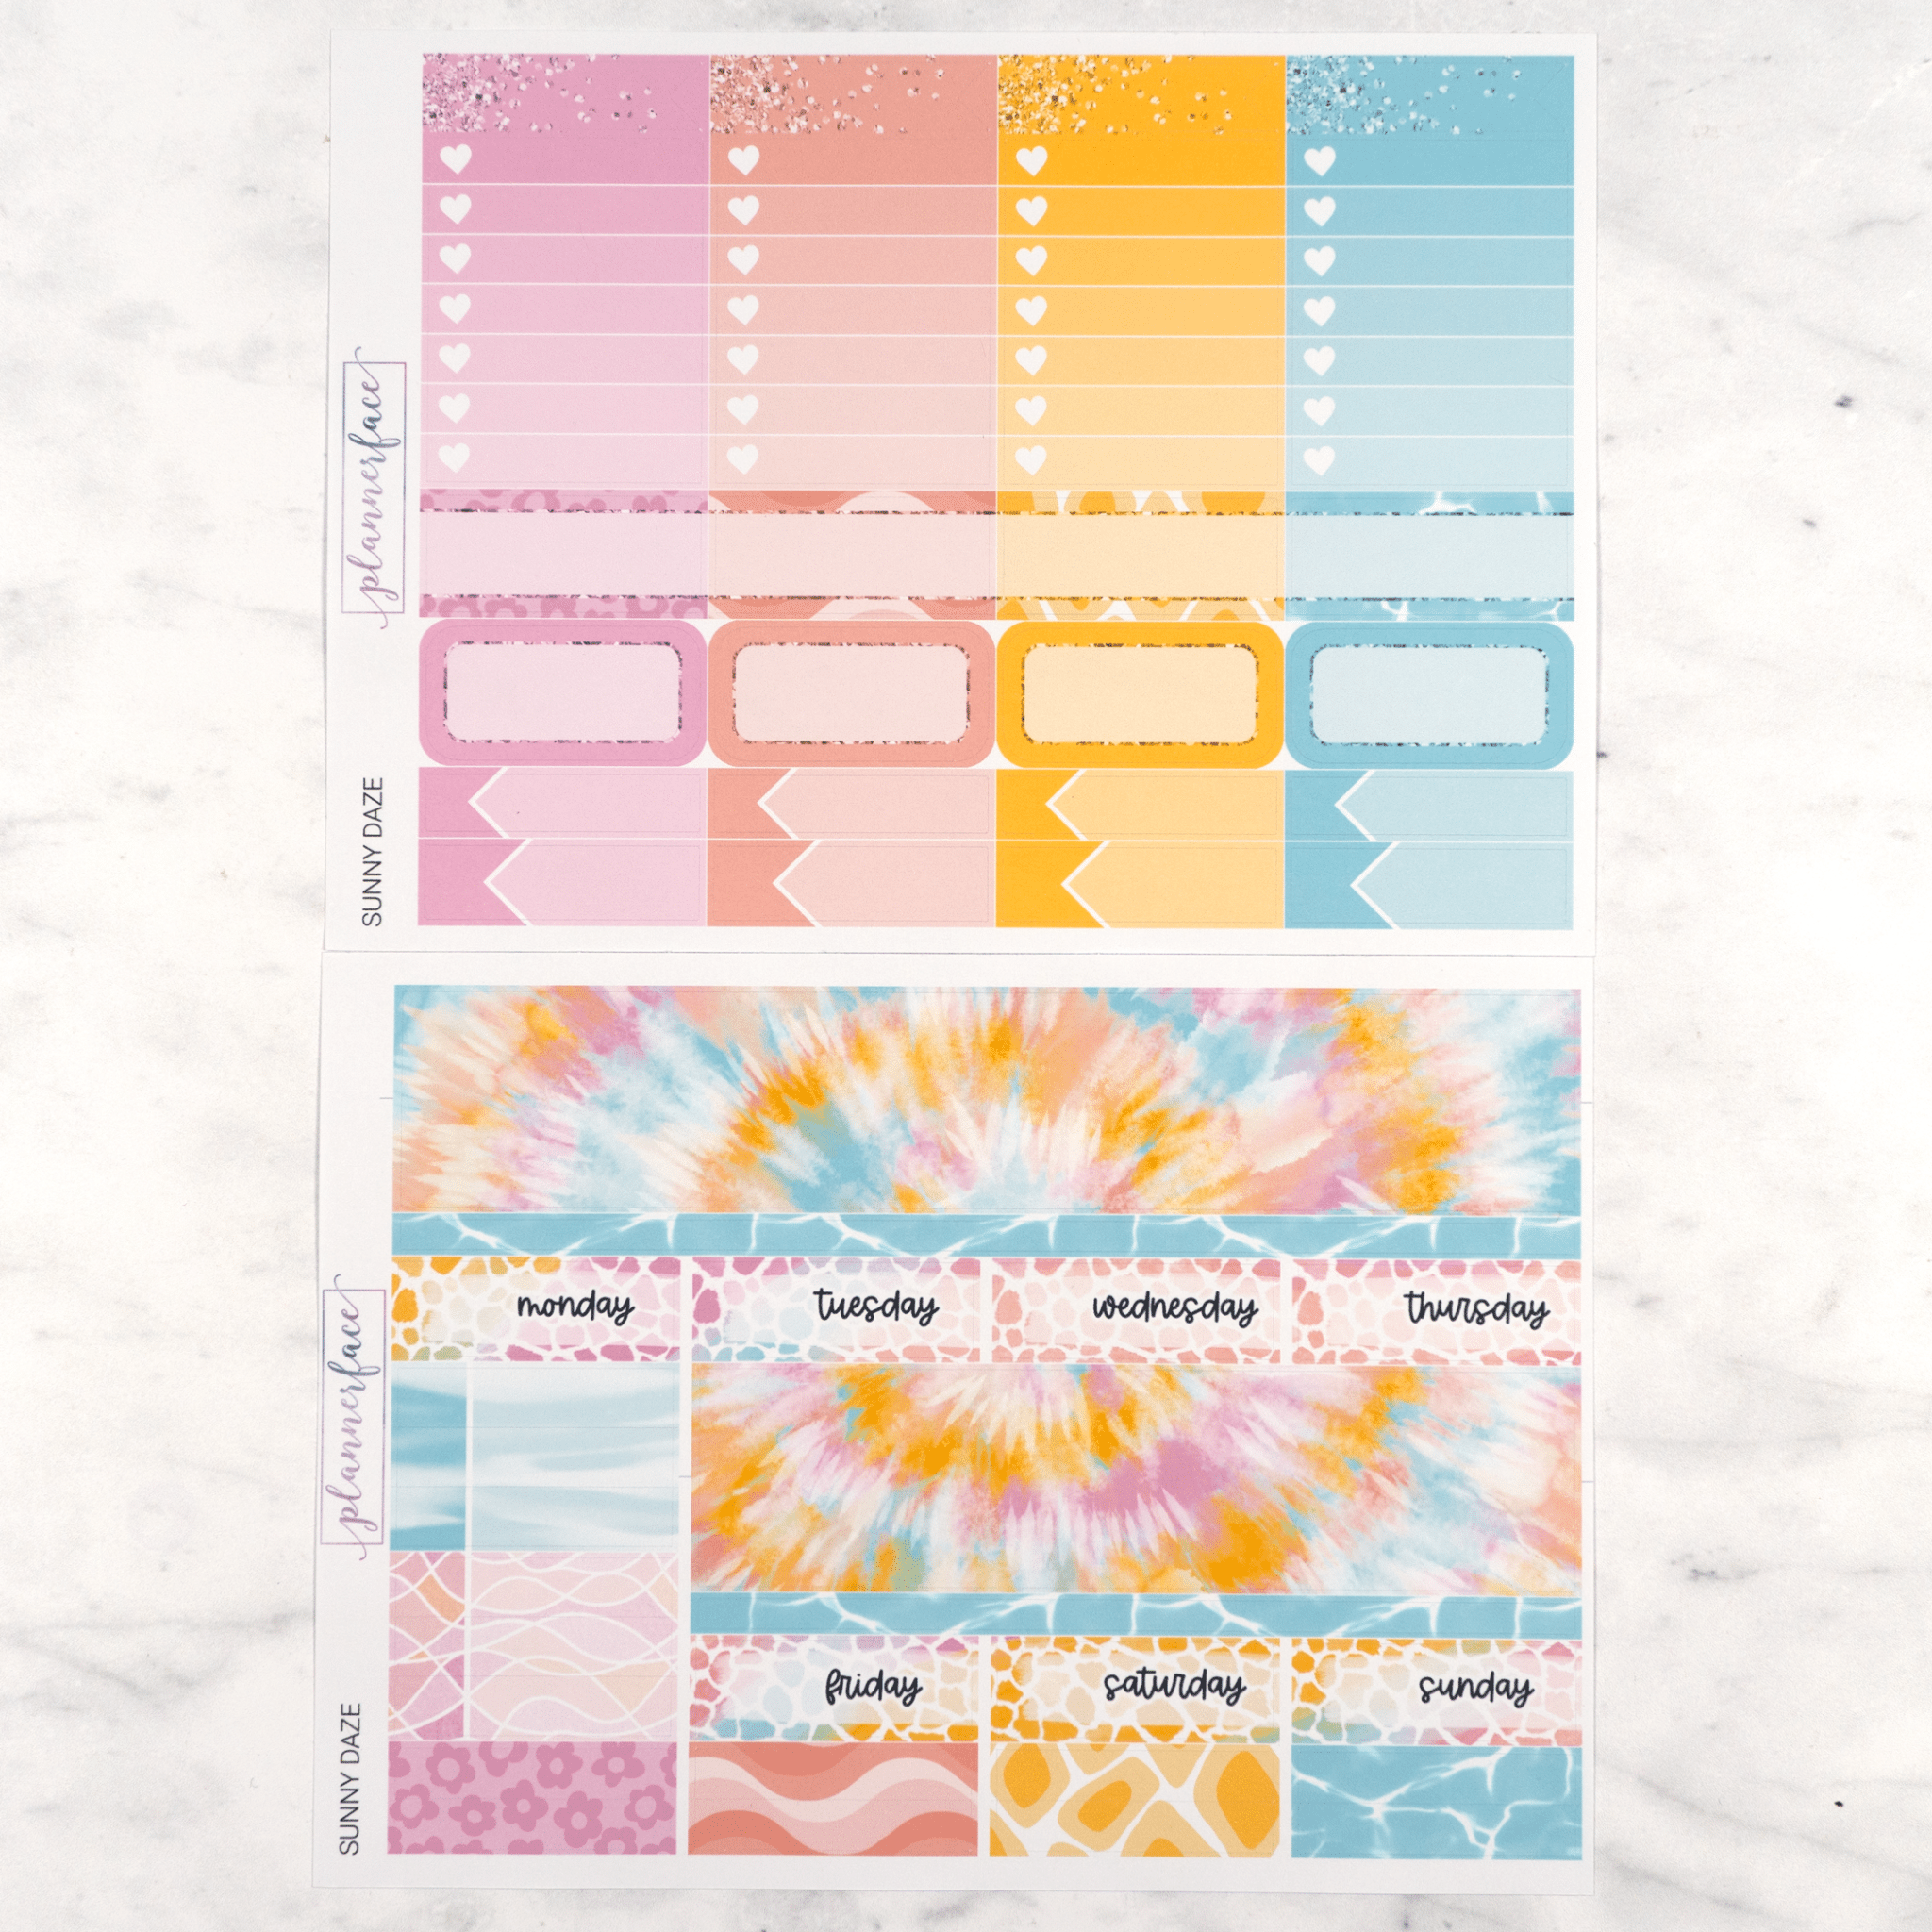 Sunny Daze Weekly Kit by Plannerface